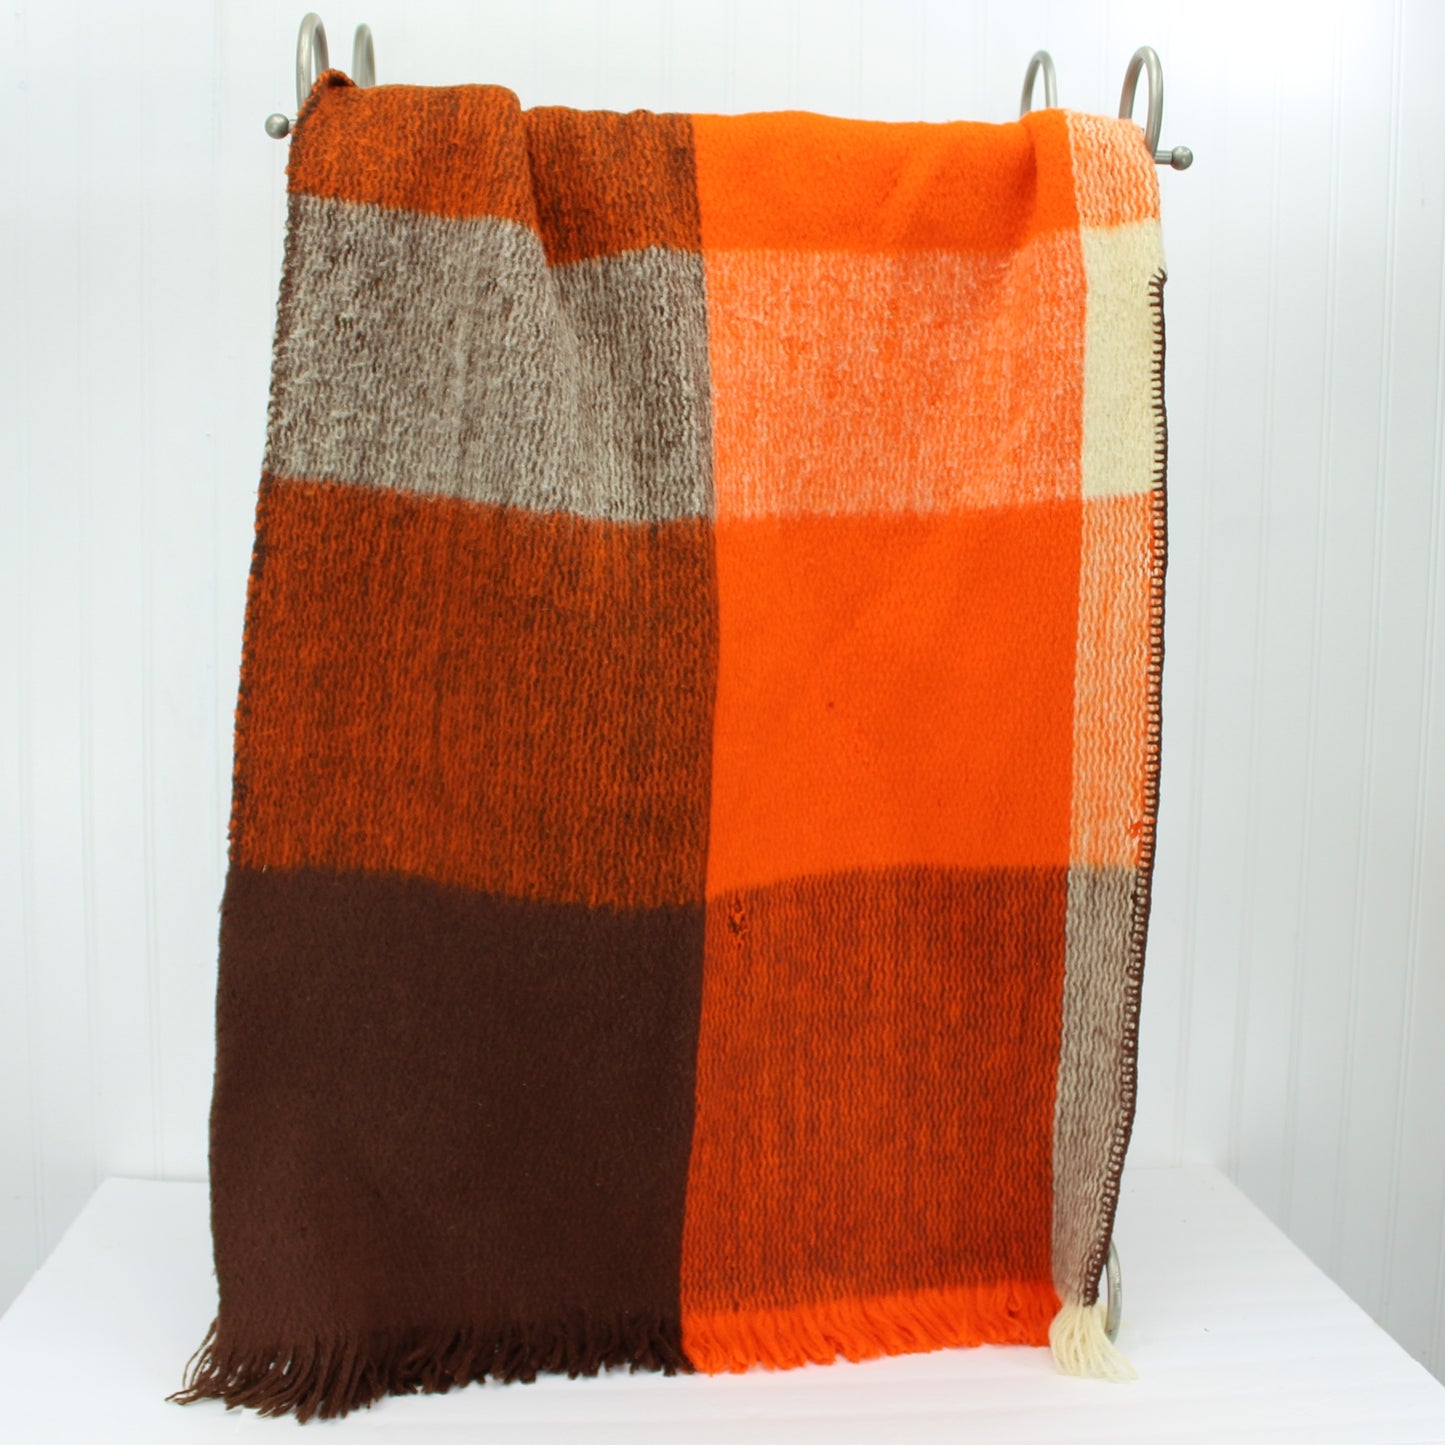 Ruana Shawl Andes Style Wool Orange Cream Brown Usable or Cutter folded view of ruana